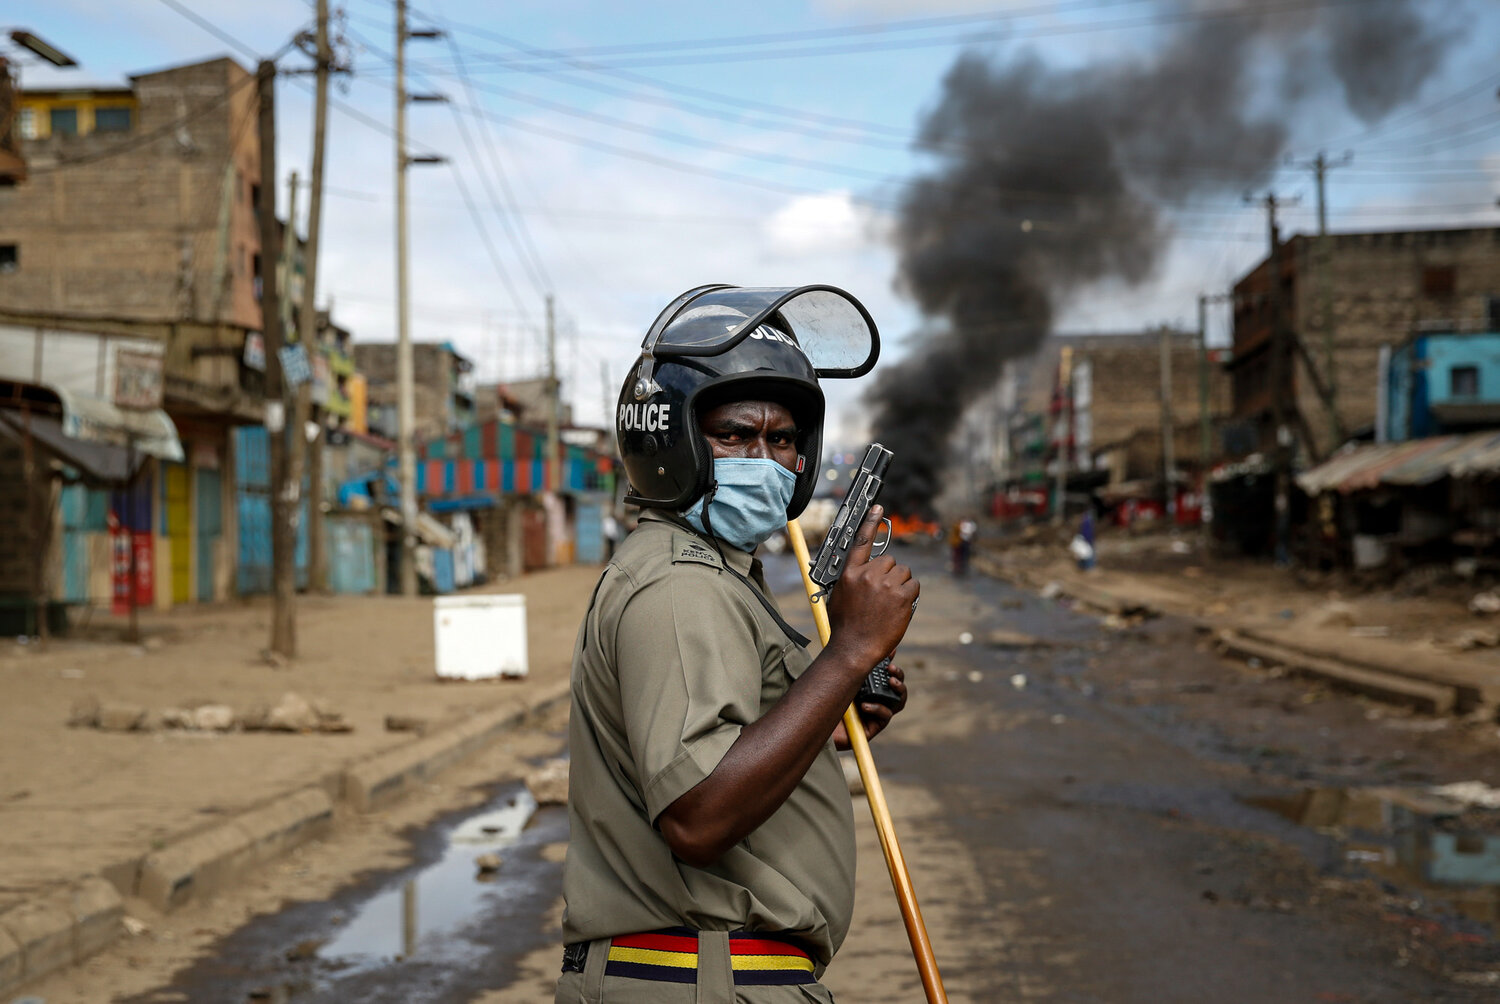  A police officer holds a pistol during clashes with protesters near a barricade of burning tires in the Kariobangi slum of Nairobi, Kenya, on May 8, 2020. Hundreds of protesters blocked one of the capital's major highways to protest government demolitions of the homes of more than 7,000 people, causing many to sleep out in the rain and cold because of restrictions on movement due to the coronavirus. (AP Photo/Brian Inganga) 